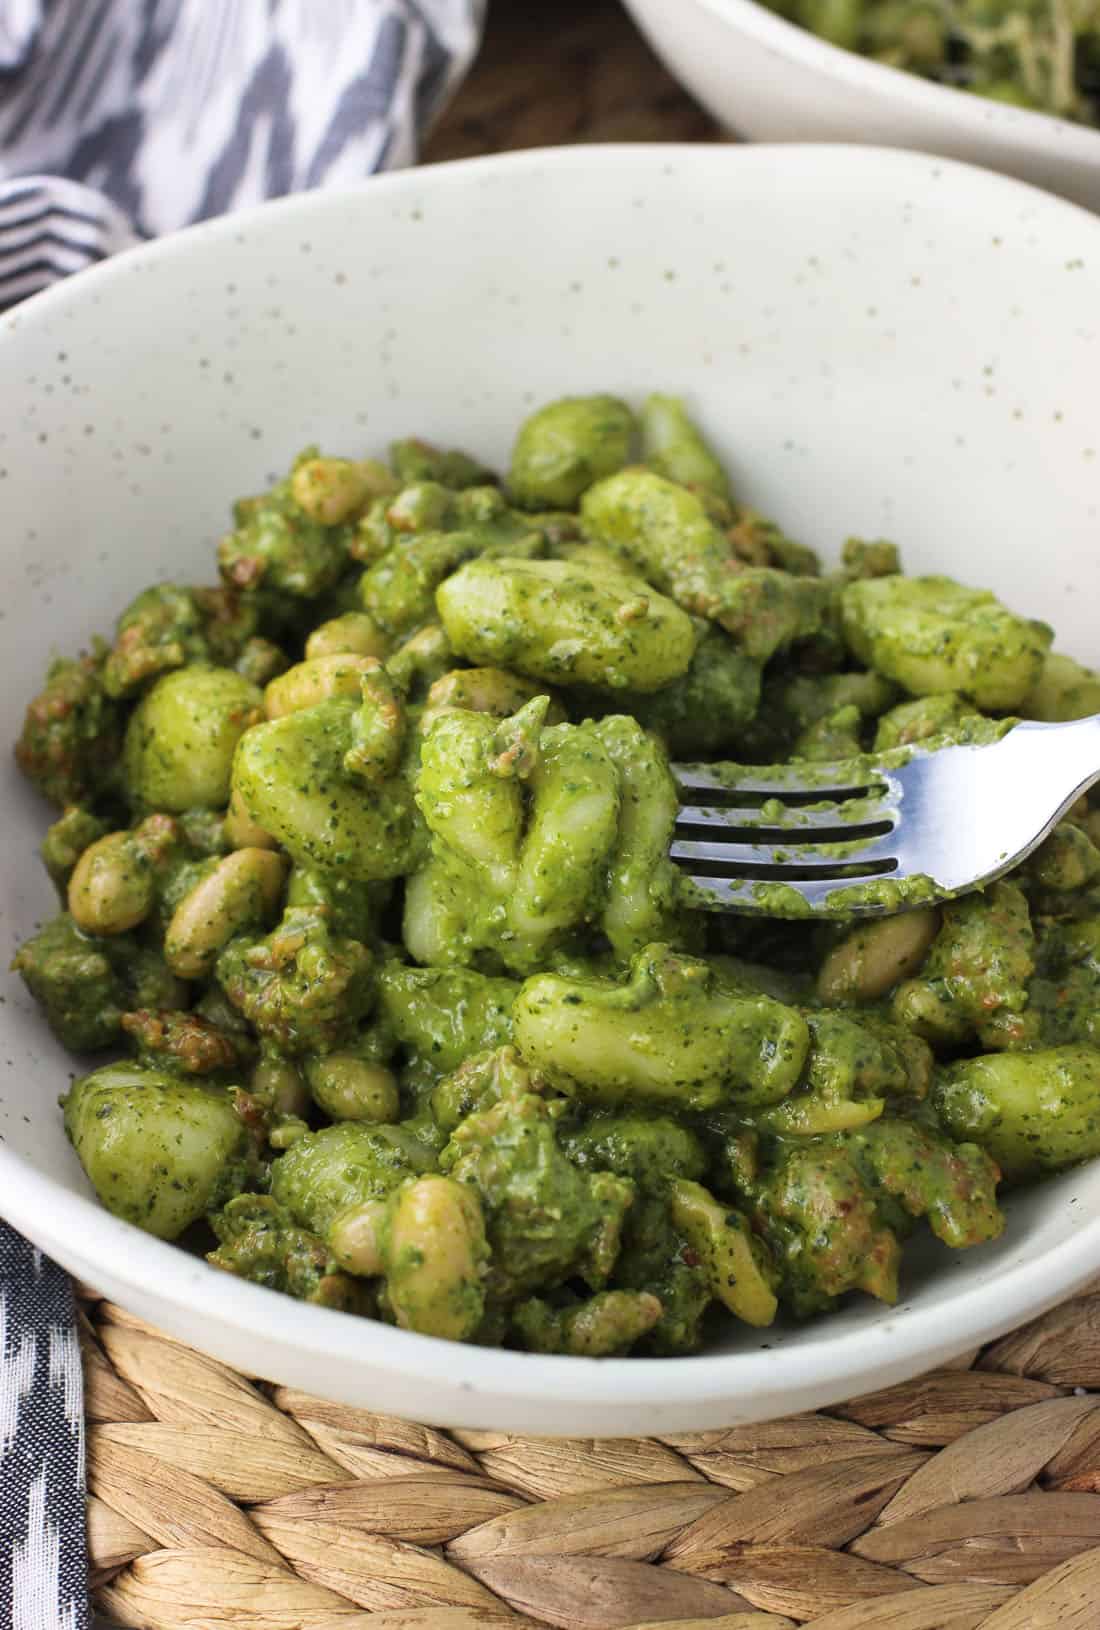 A dish of gnocchi, cannellini beans, and crumbled sausage covered in pesto sauce with a fork spearing several gnocchi